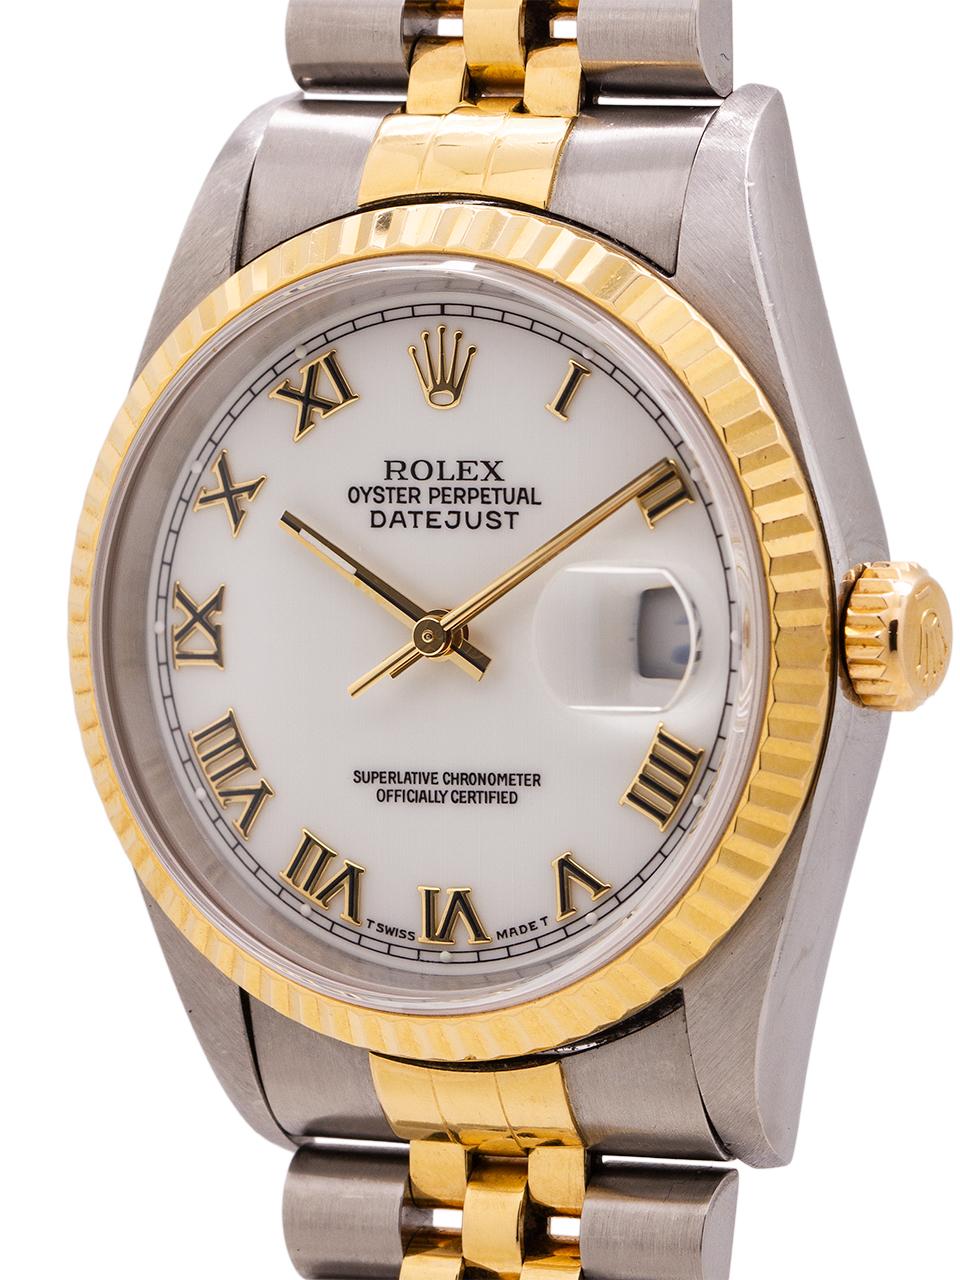 
Man’s Rolex Datejust ref 16233, in stainless steel and 18K yellow gold. Serial# W, circa 1995. Featuring 36mm diameter case with 18K yellow gold fluted bezel, sapphire crystal, and beautiful eggshell Roman dial. Powered by calibre 3135 self winding